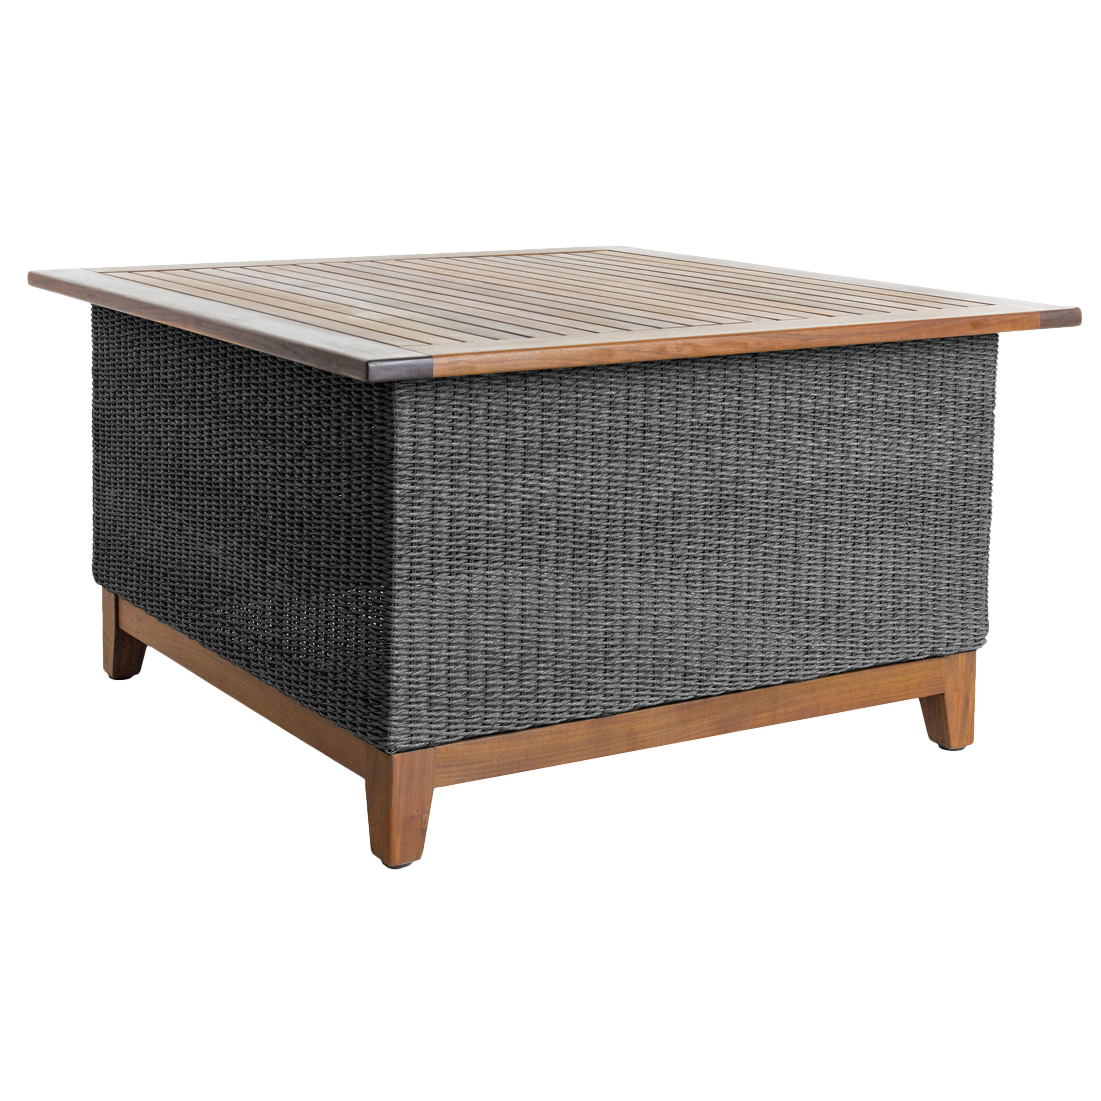 Coral 42" Square Chat Table